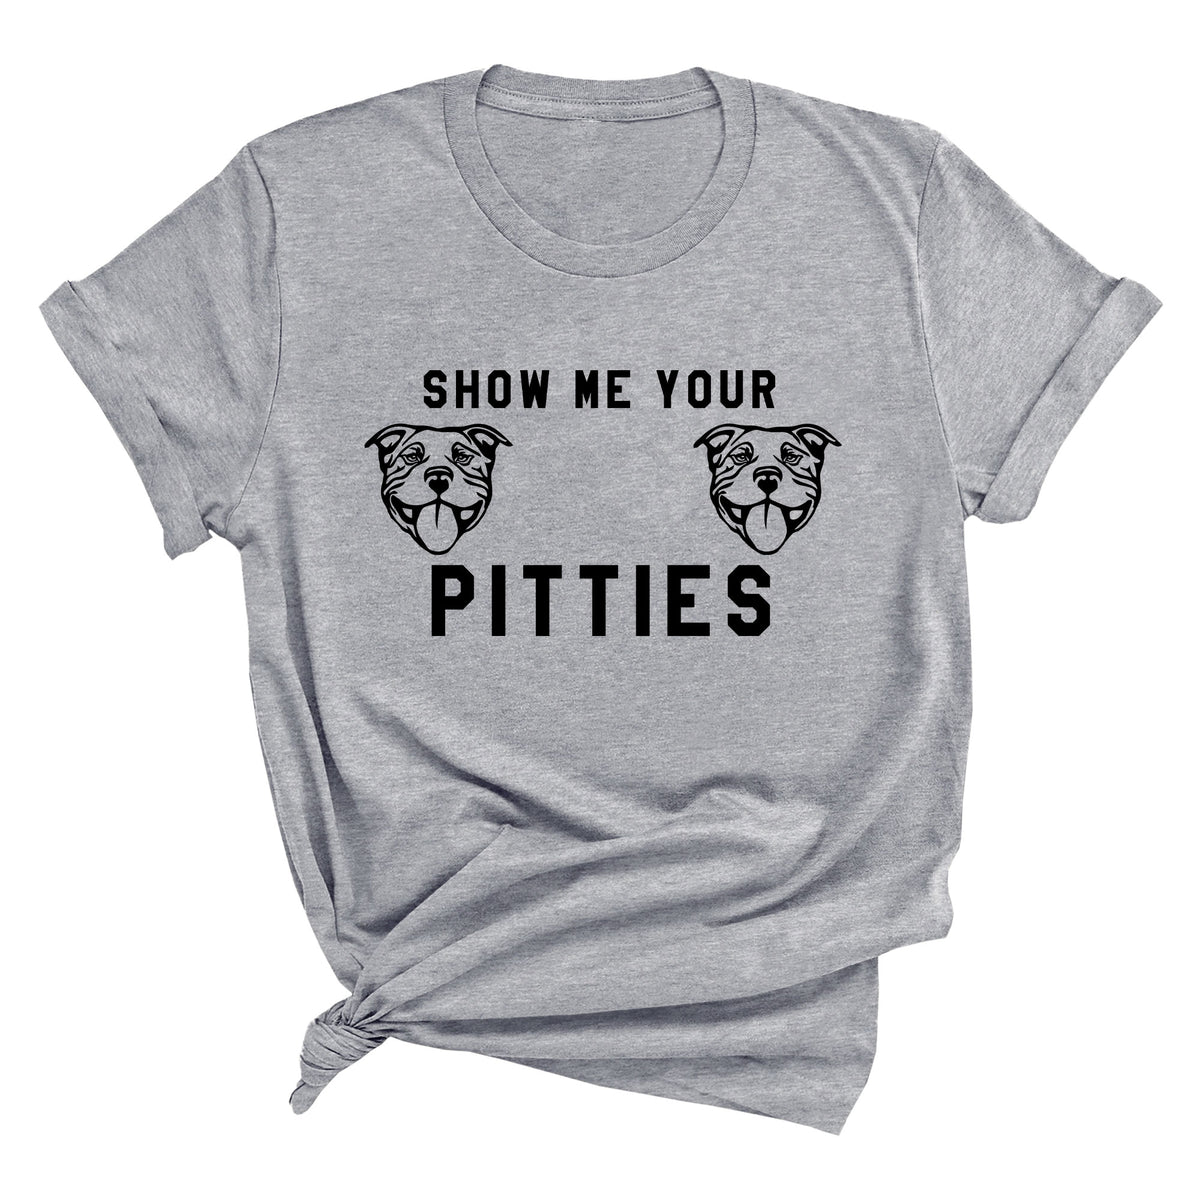 Show Me Your Pitties Unisex T-Shirt